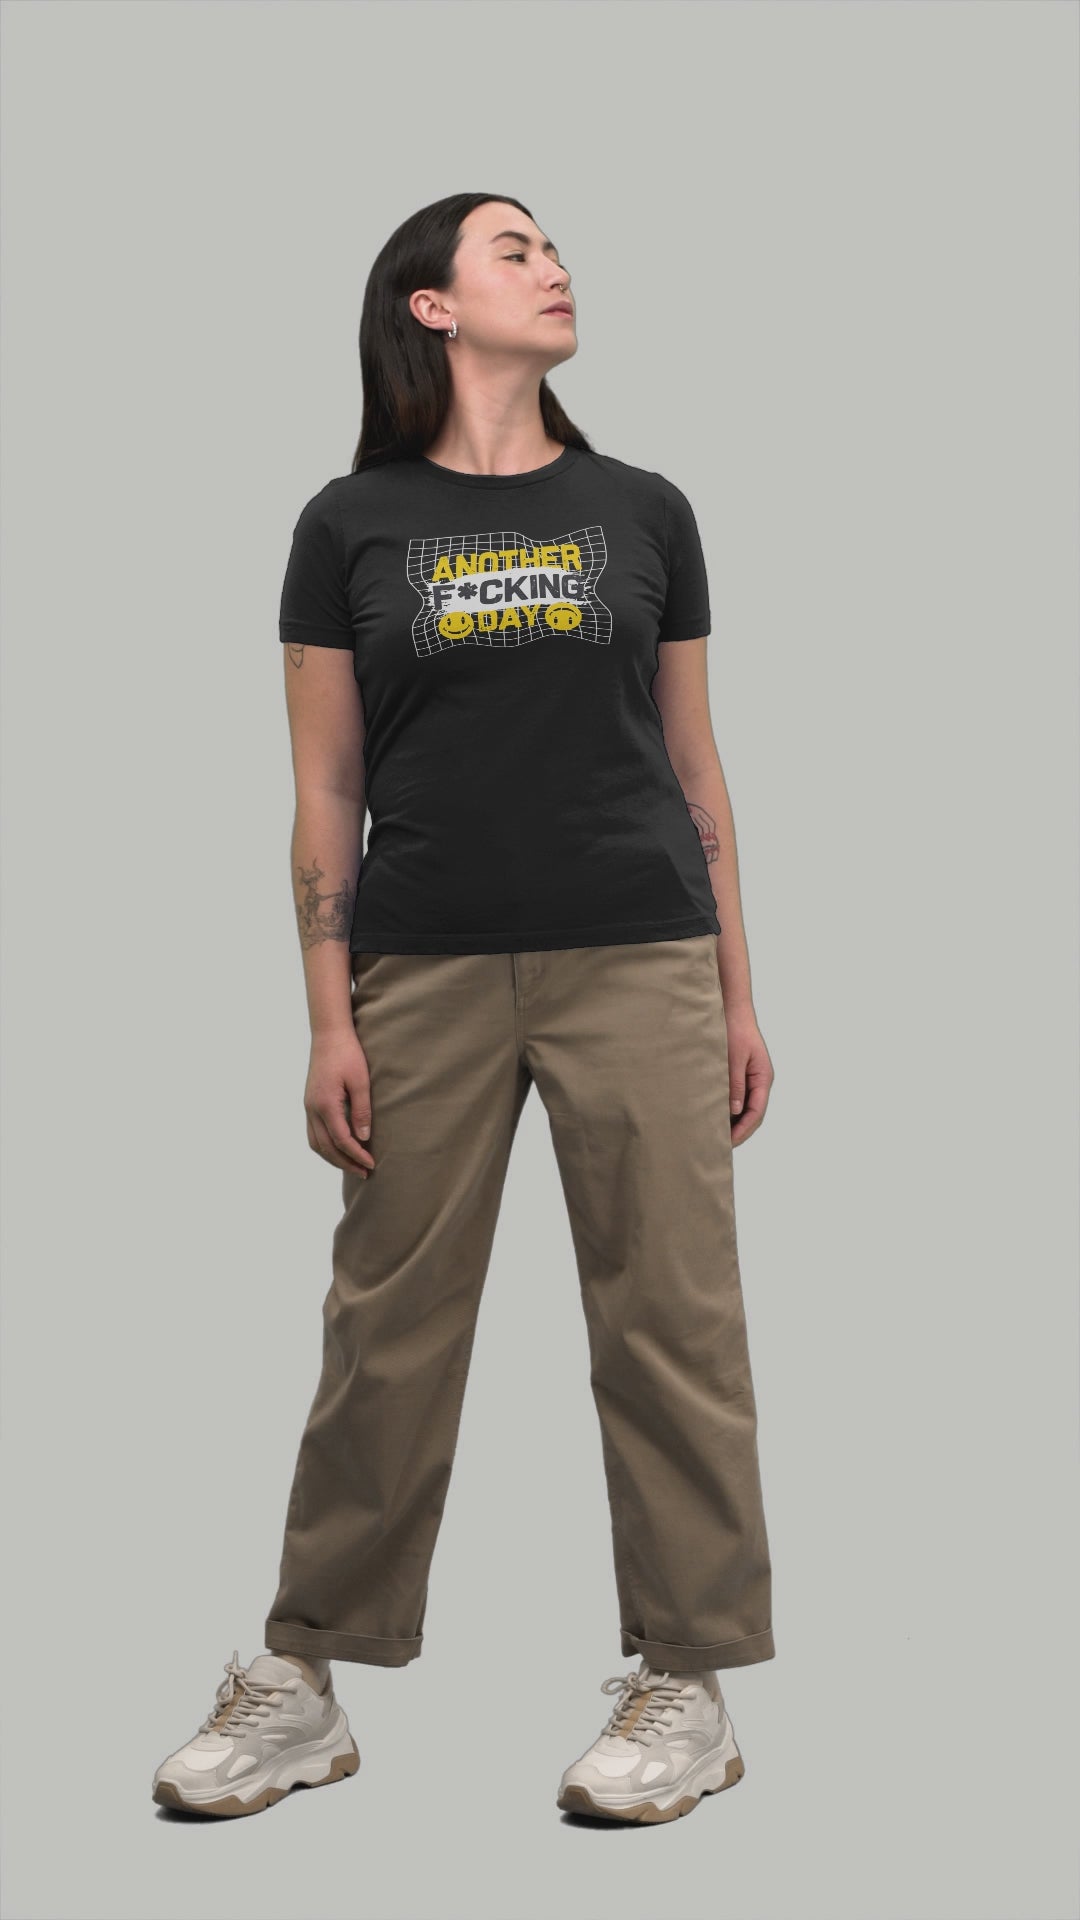 Woman in a black t-shirt with a graphic design featuring bold yellow text 'ANOTHER F*CKING DAY' with a distressed grid background and two smiley faces.